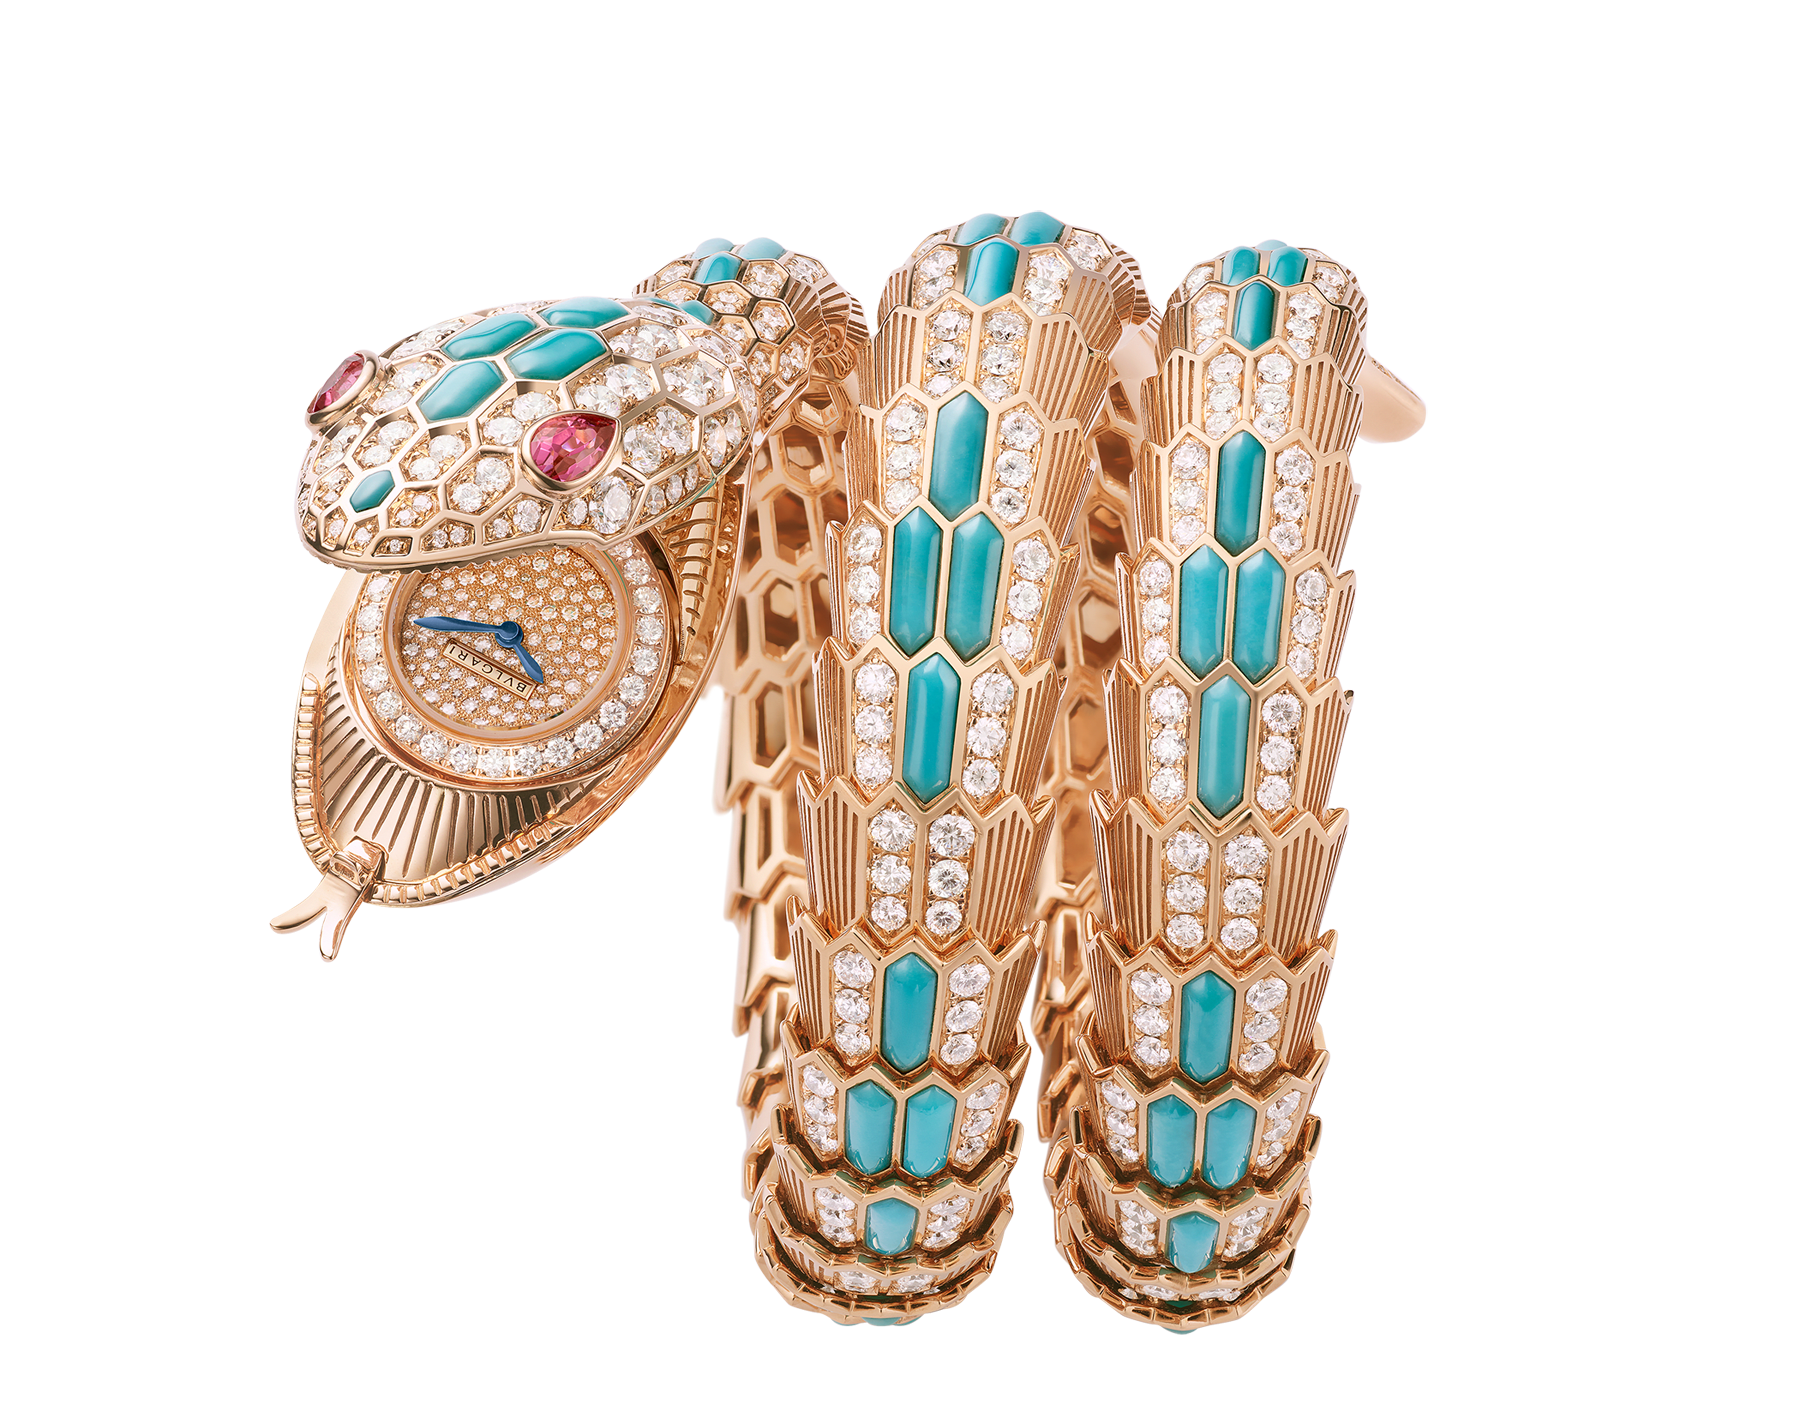 Serpenti Misteriosi High Jewellery secret watch with mechanical manufacture micro-movement with manual winding, 18 kt rose gold case and bracelet set with turquoise inserts, brilliant-cut diamonds and two pear-cut rubellites, with pavé-set diamond dial. 103558 image 1